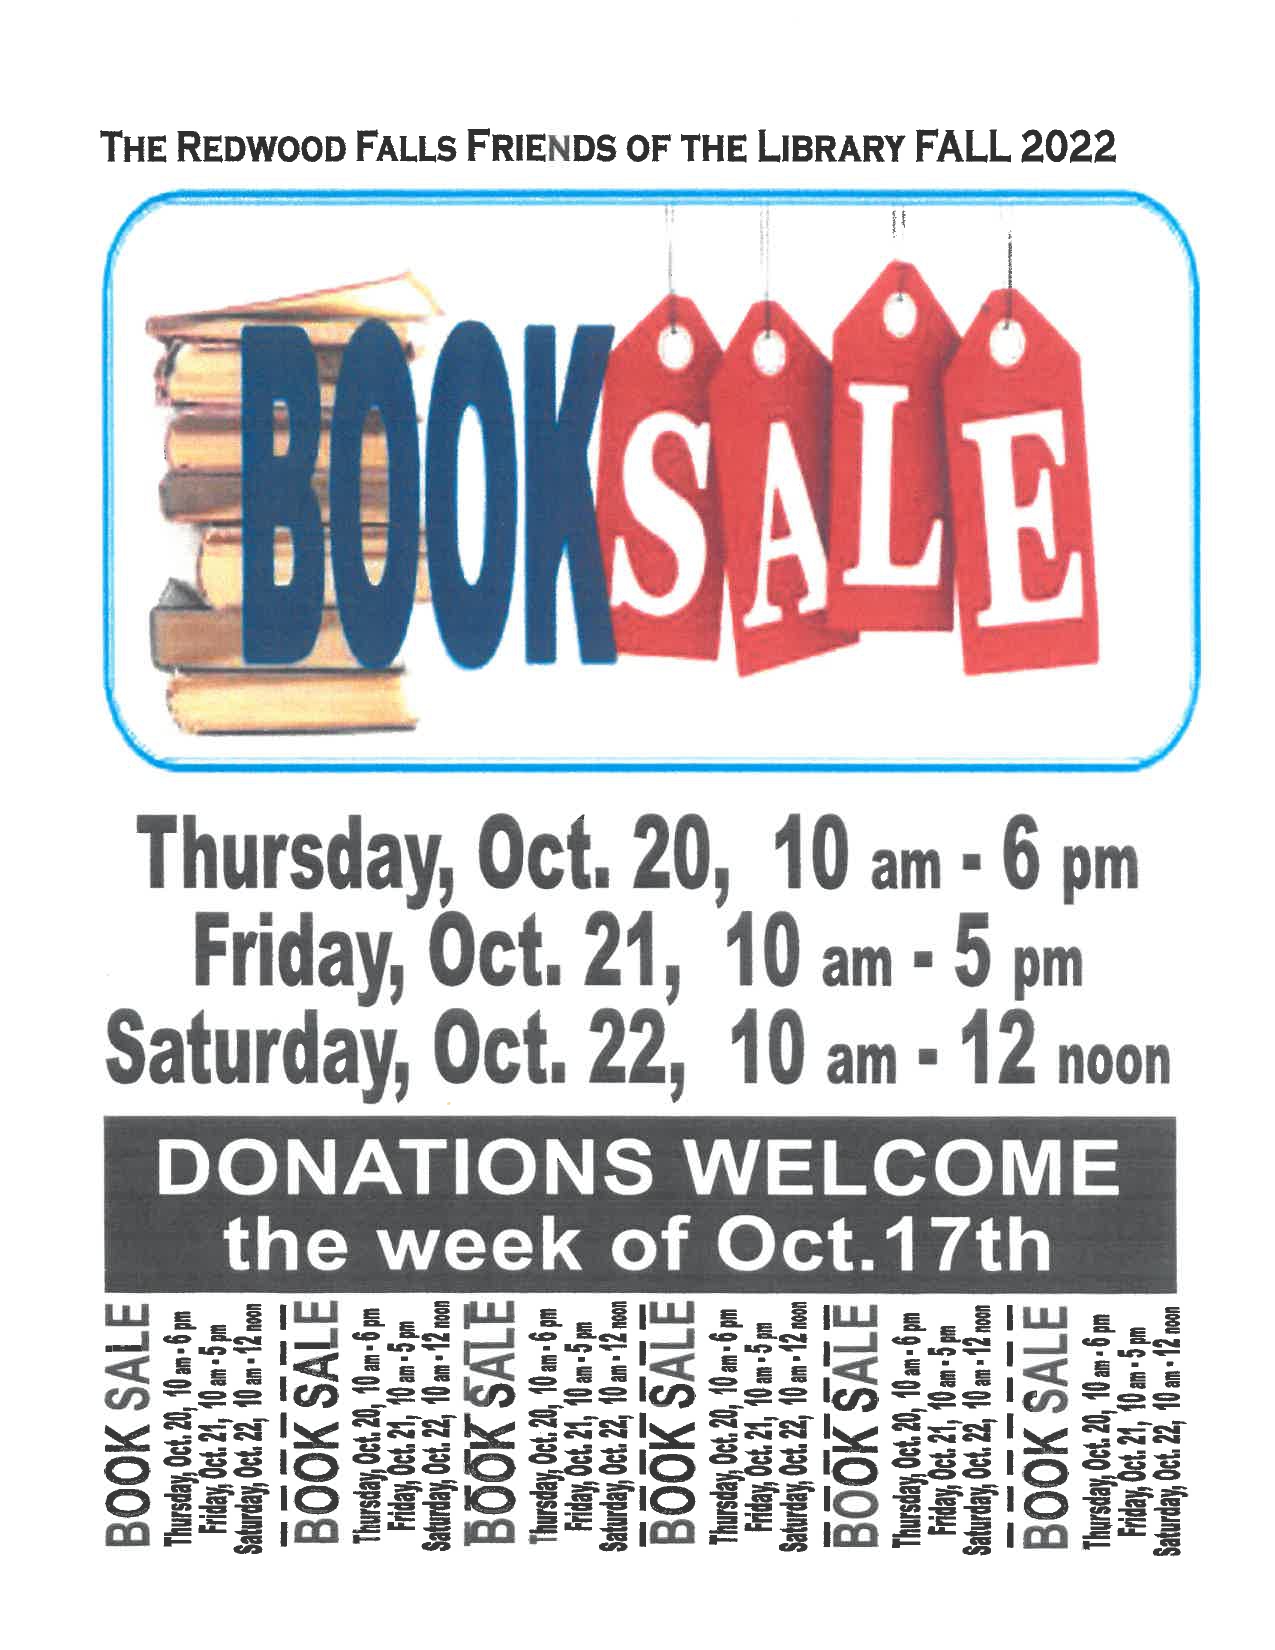 <h1 class="tribe-events-single-event-title">Friends of the Library Book Sale</h1>